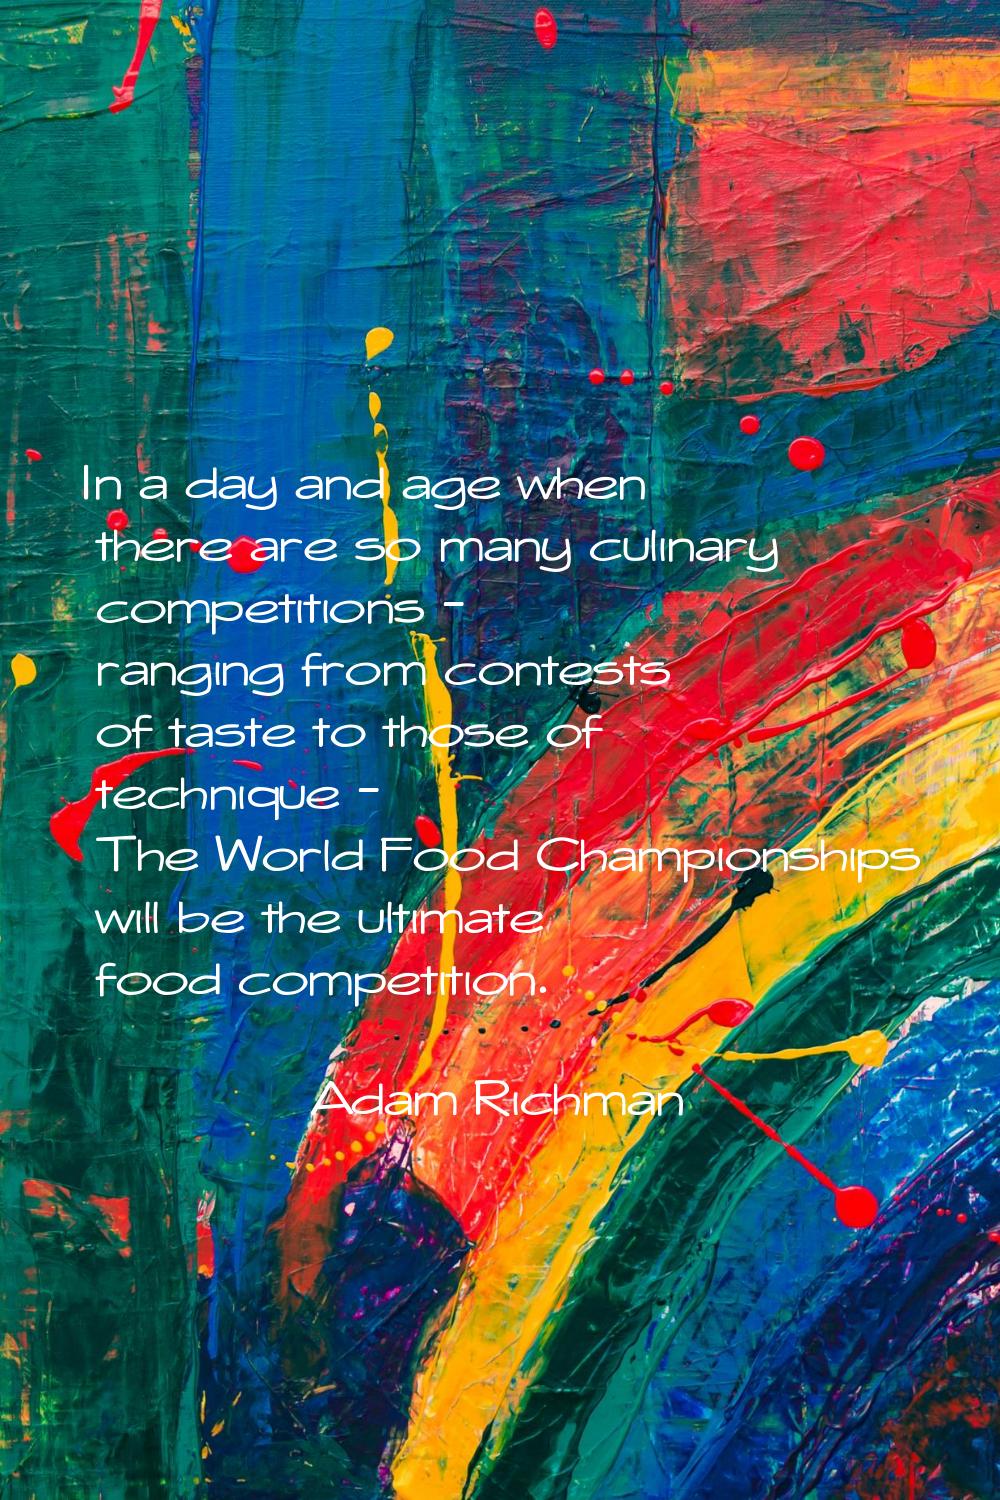 In a day and age when there are so many culinary competitions - ranging from contests of taste to t